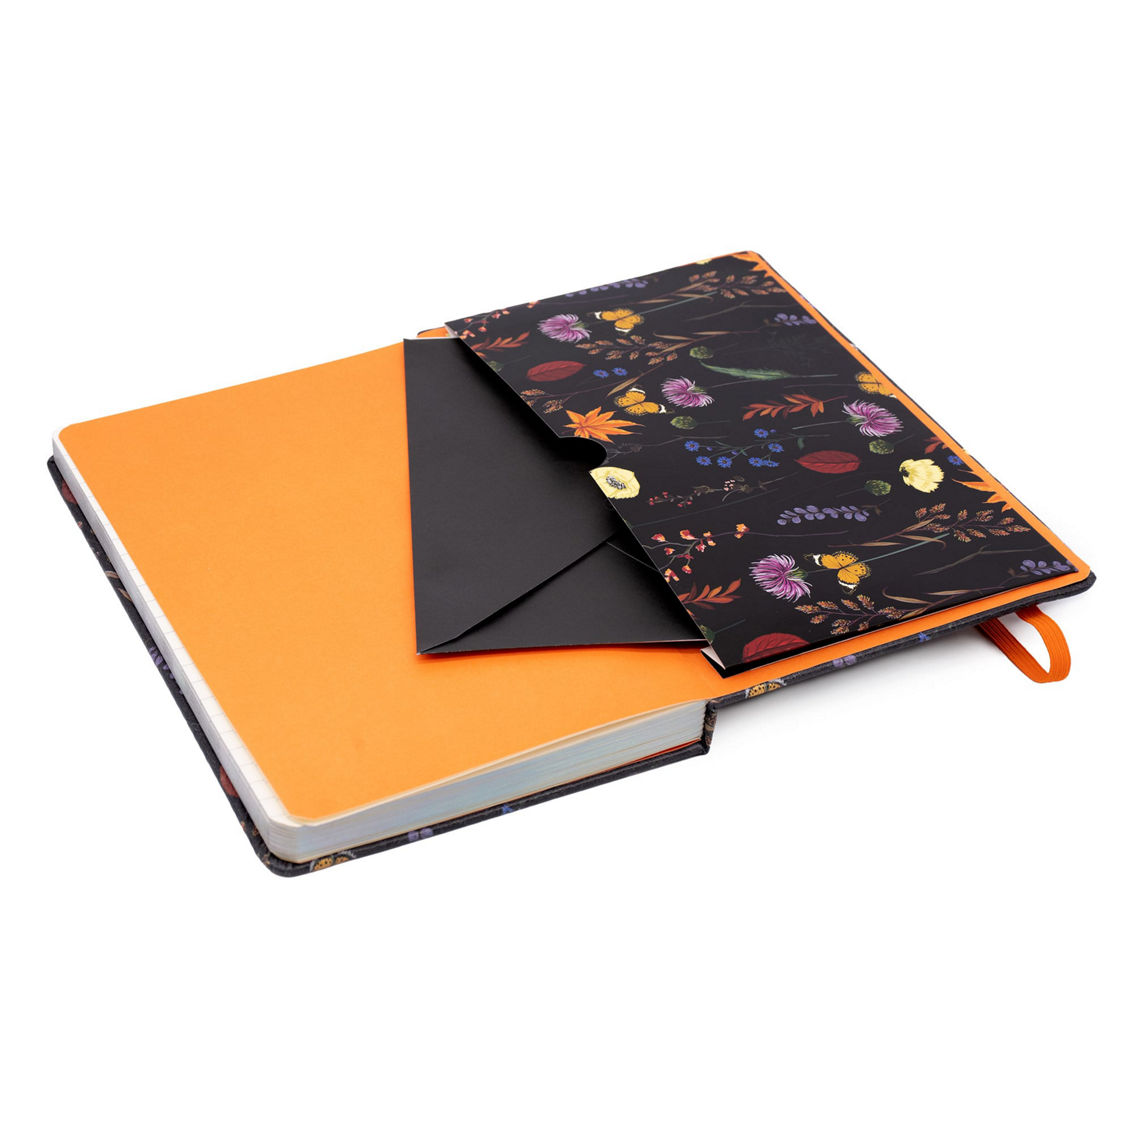 Pukka Pads Bloom Softcover Notebook with Pocket - Cream - Pack 3 - Image 5 of 5